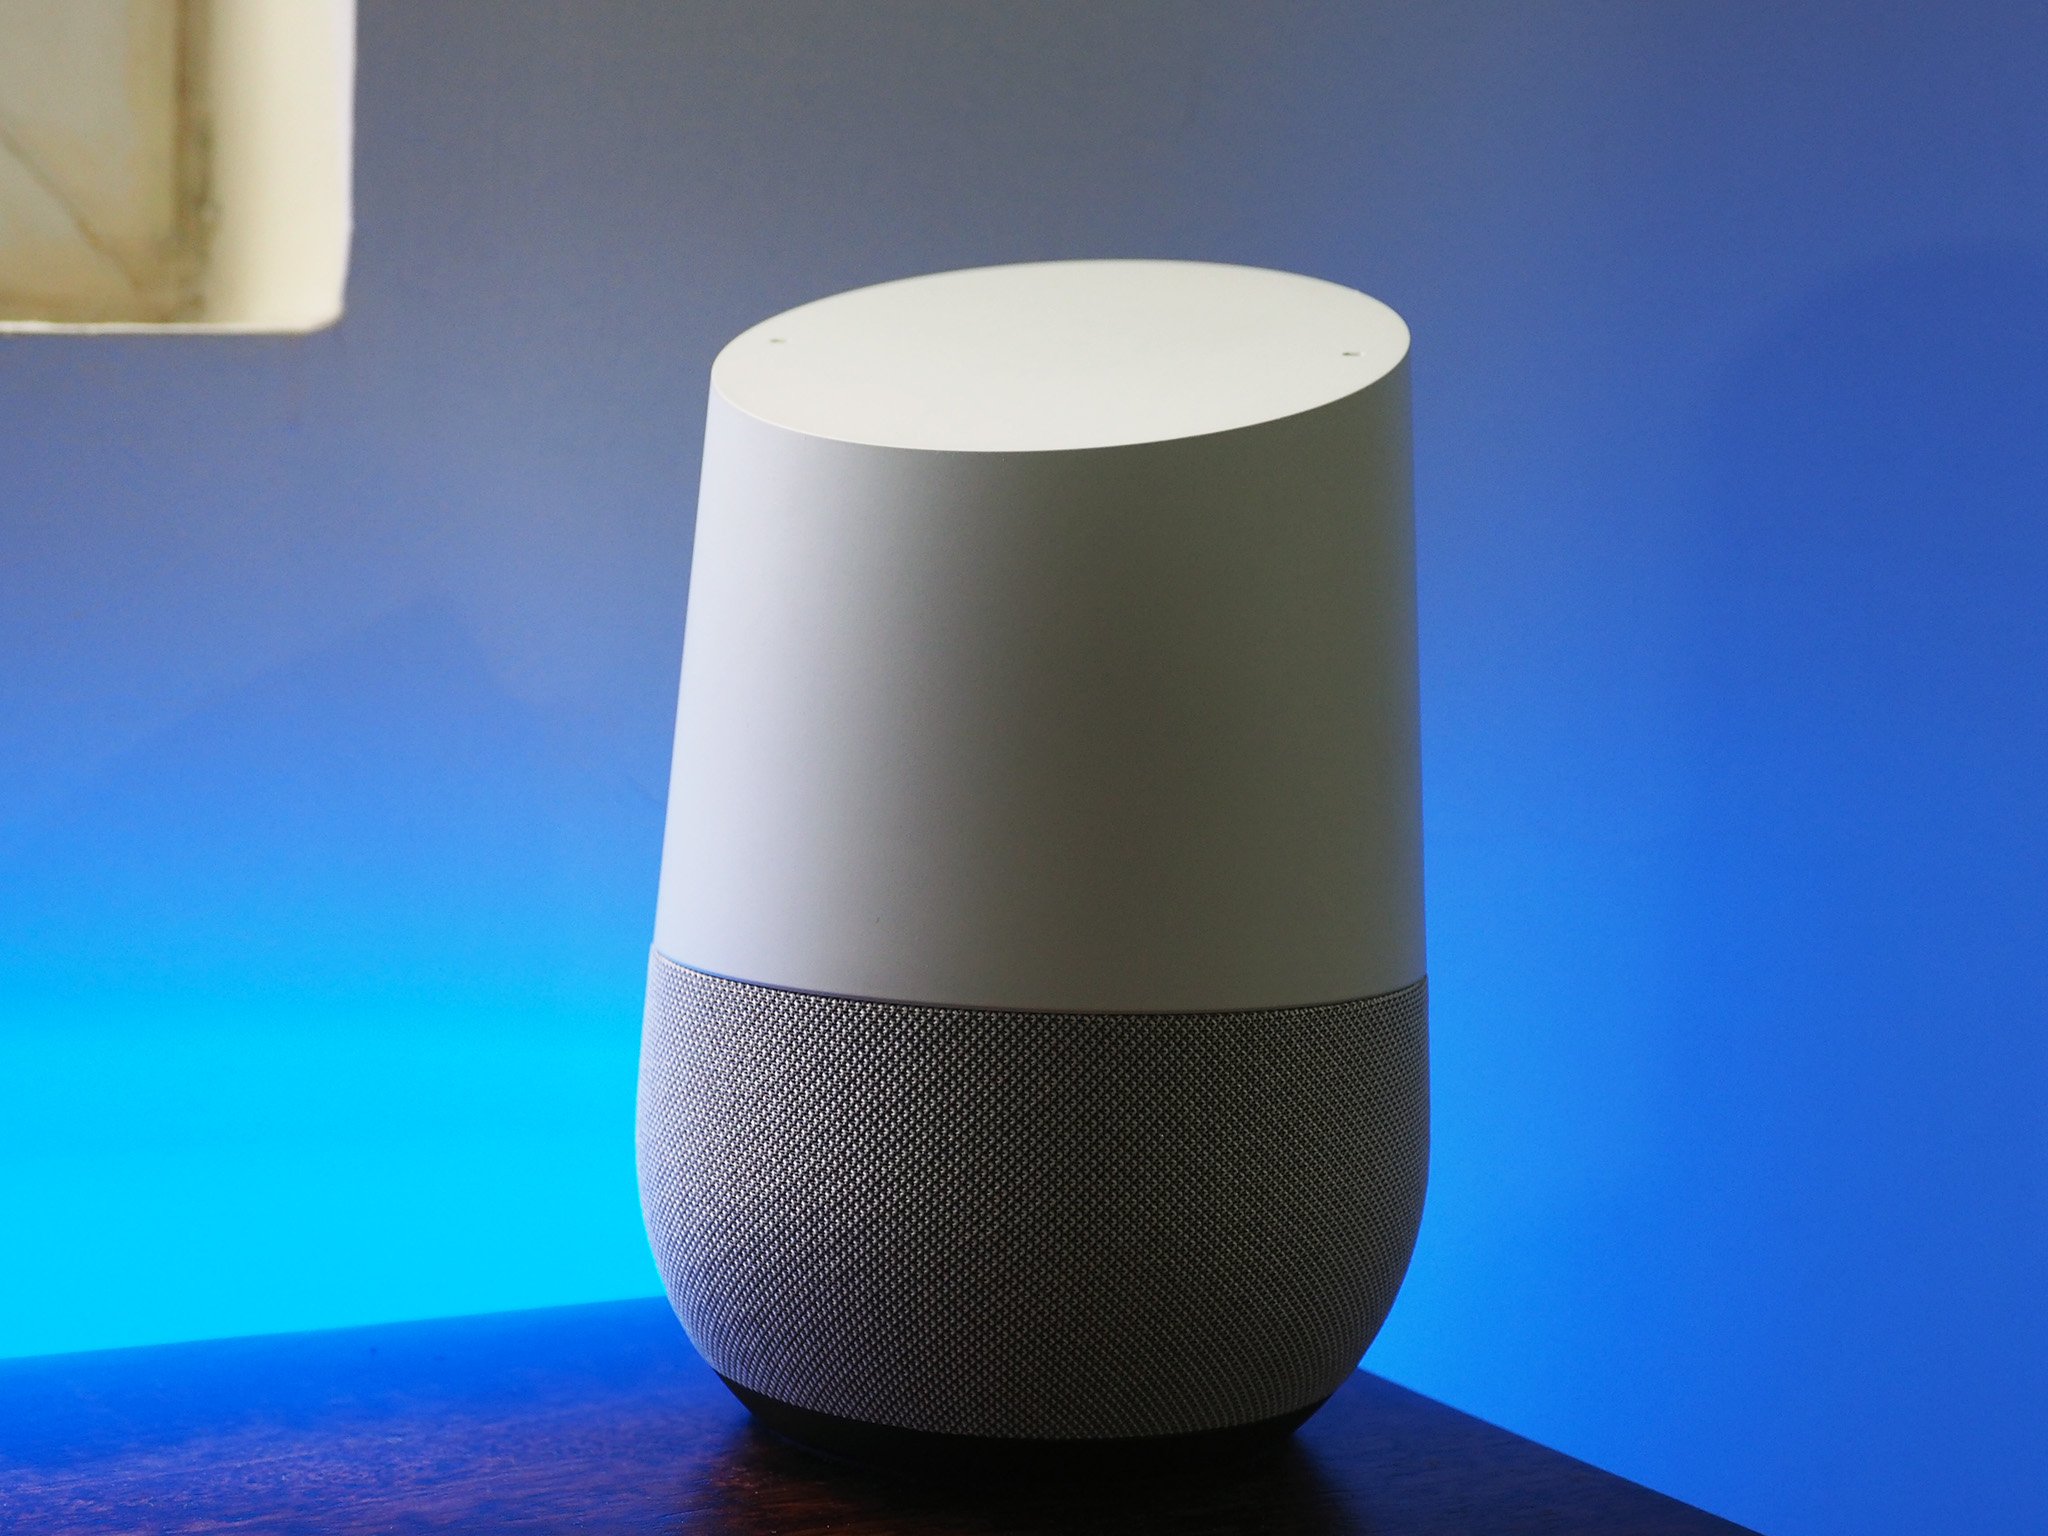 Google Home with blue lighting behind it